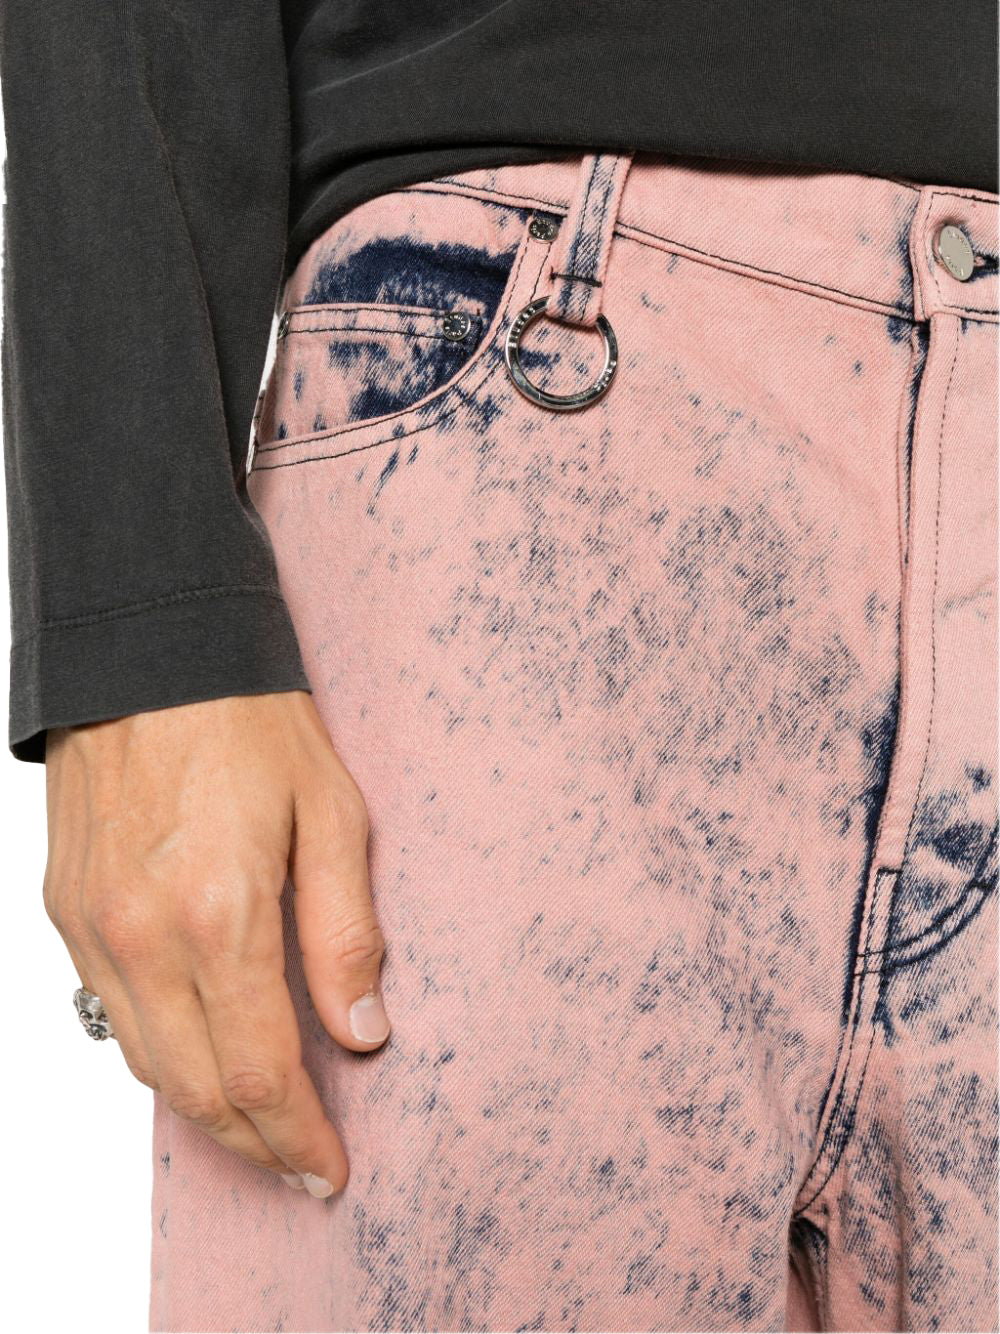 Pink OverDyed jeans trousers